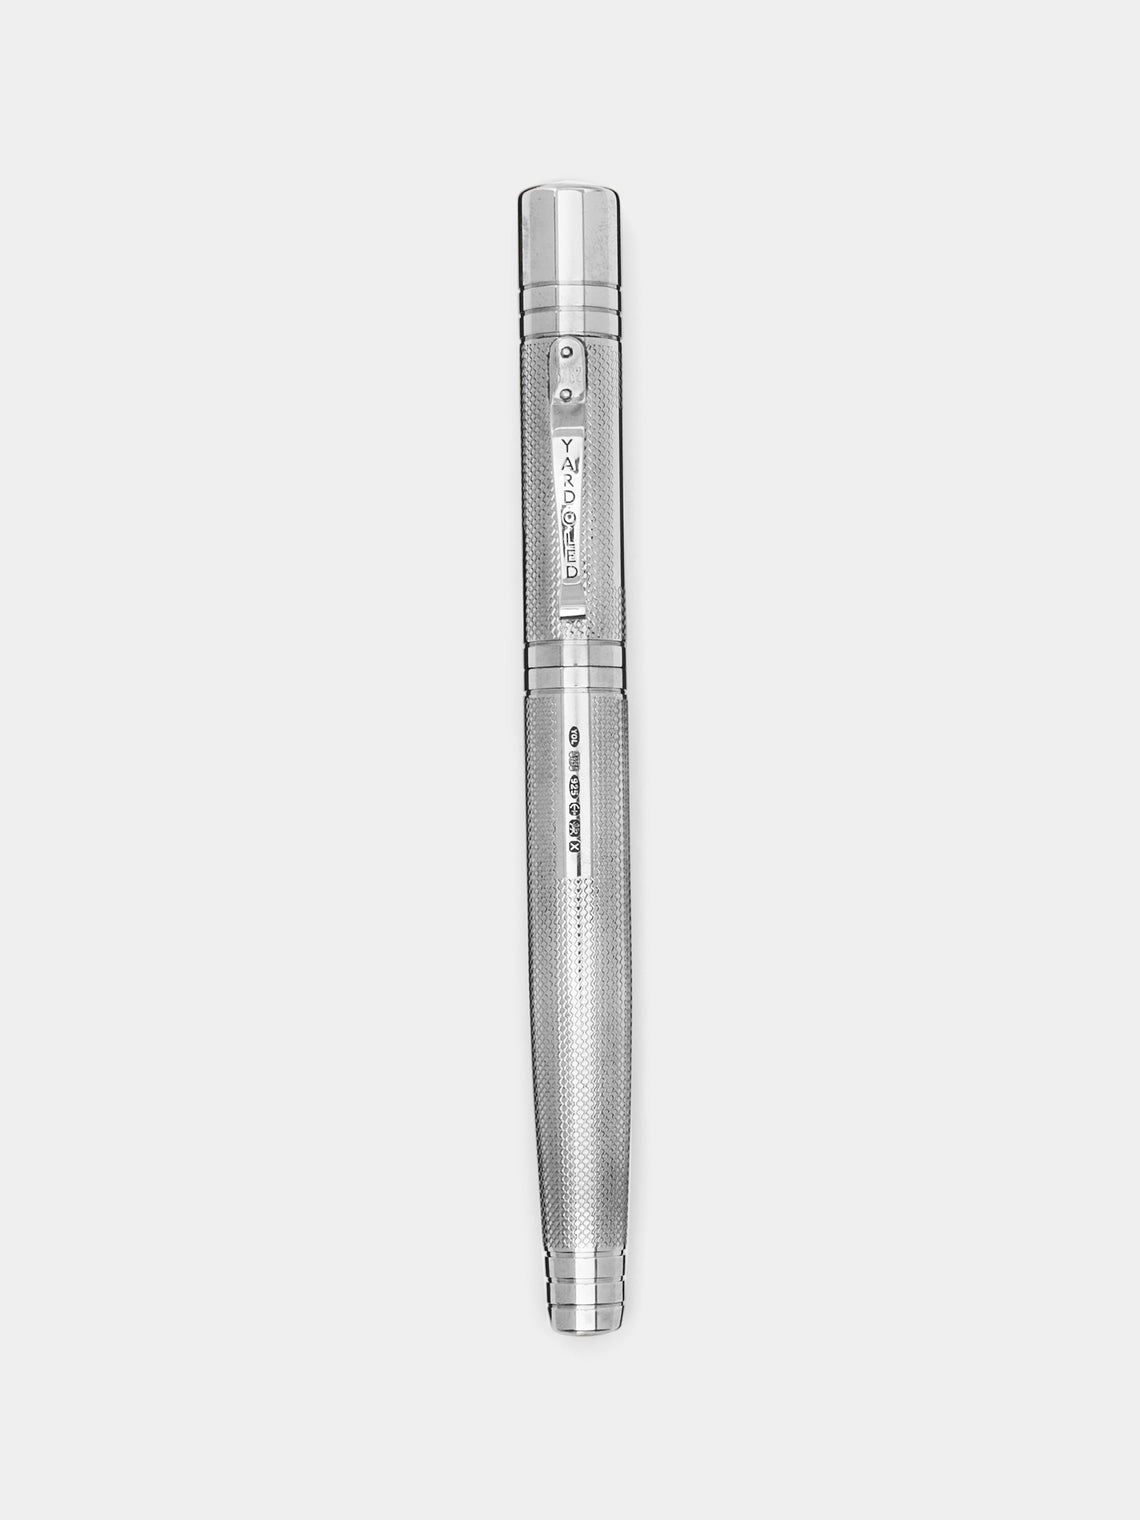 Yard O Led - Viceroy Grand Sterling Silver Barley Fountain Pen - Silver - ABASK - 